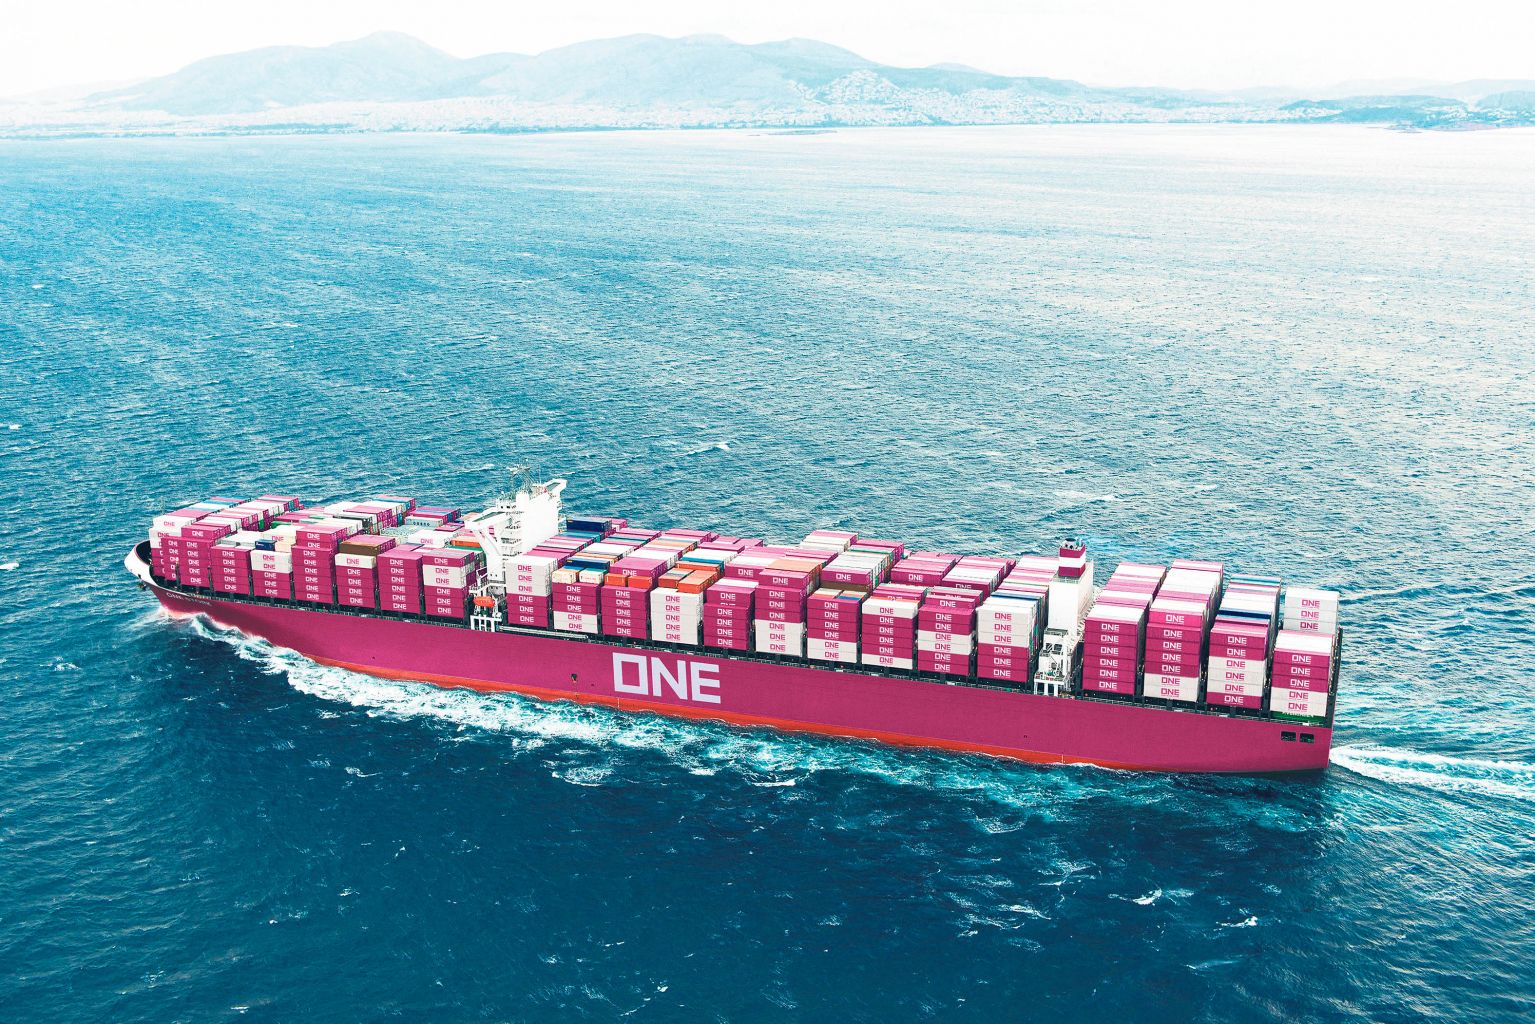 Ocean Network Express commenced operations on April 1, 2018